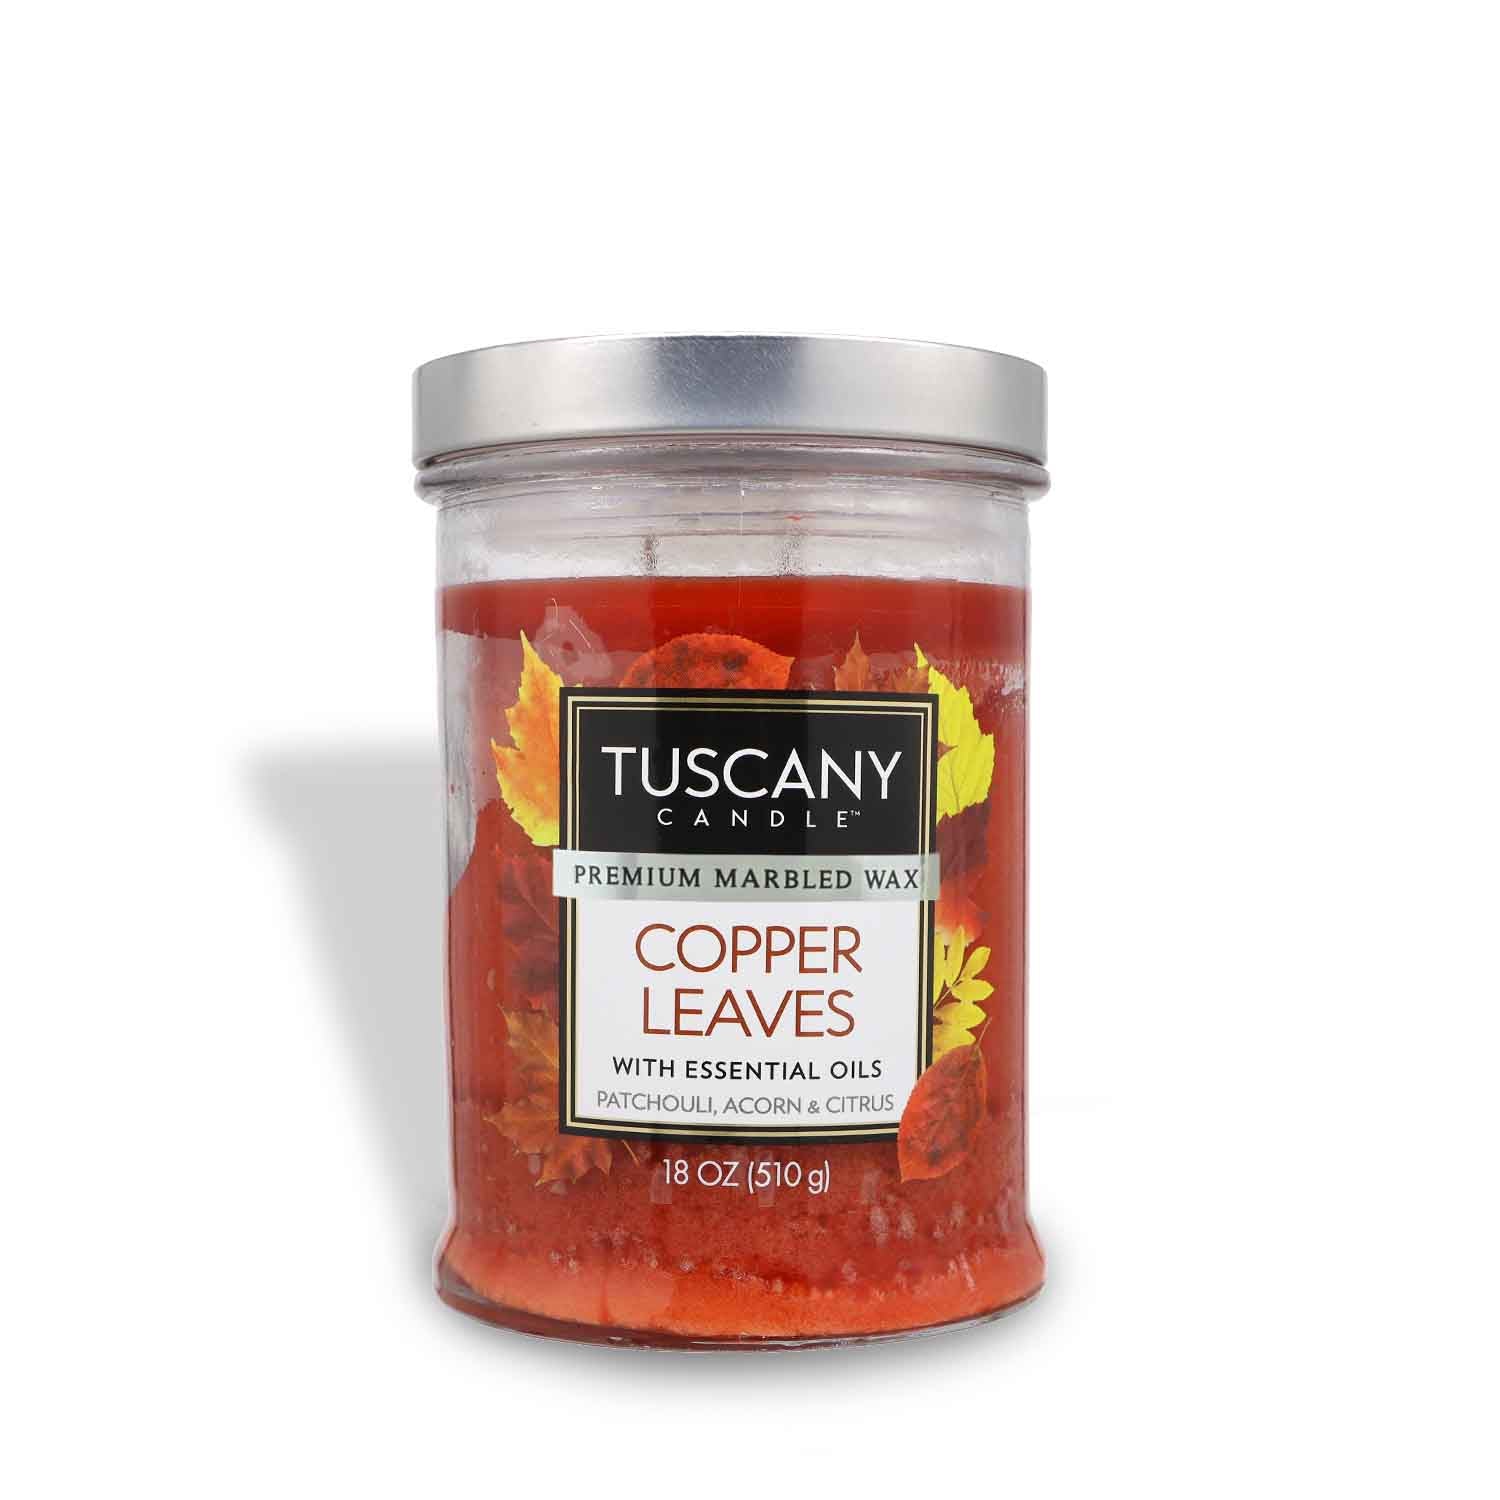 Indulge in the Copper Leaves Long-Lasting Scented Jar Candle (18 oz) by Tuscany Candle, featuring acorn and citrus aromas.